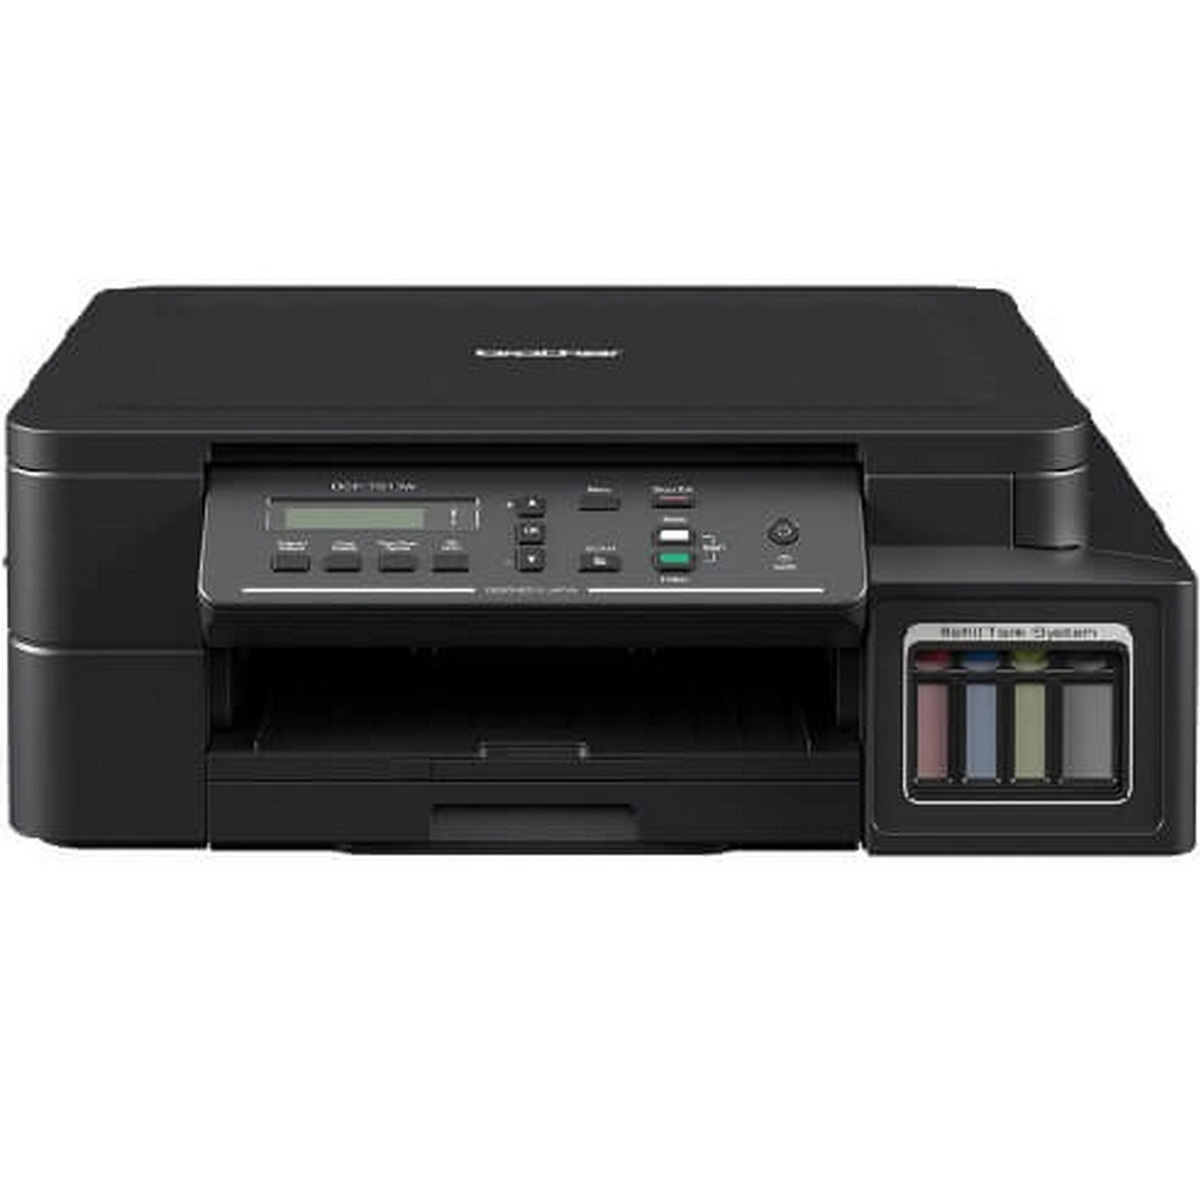 Струйные мфу brother inkbenefit plus. Brother DCP-t510w. Brother DCP-t310. Принтер brother DCP струйный. МФУ brother DCP-t710.